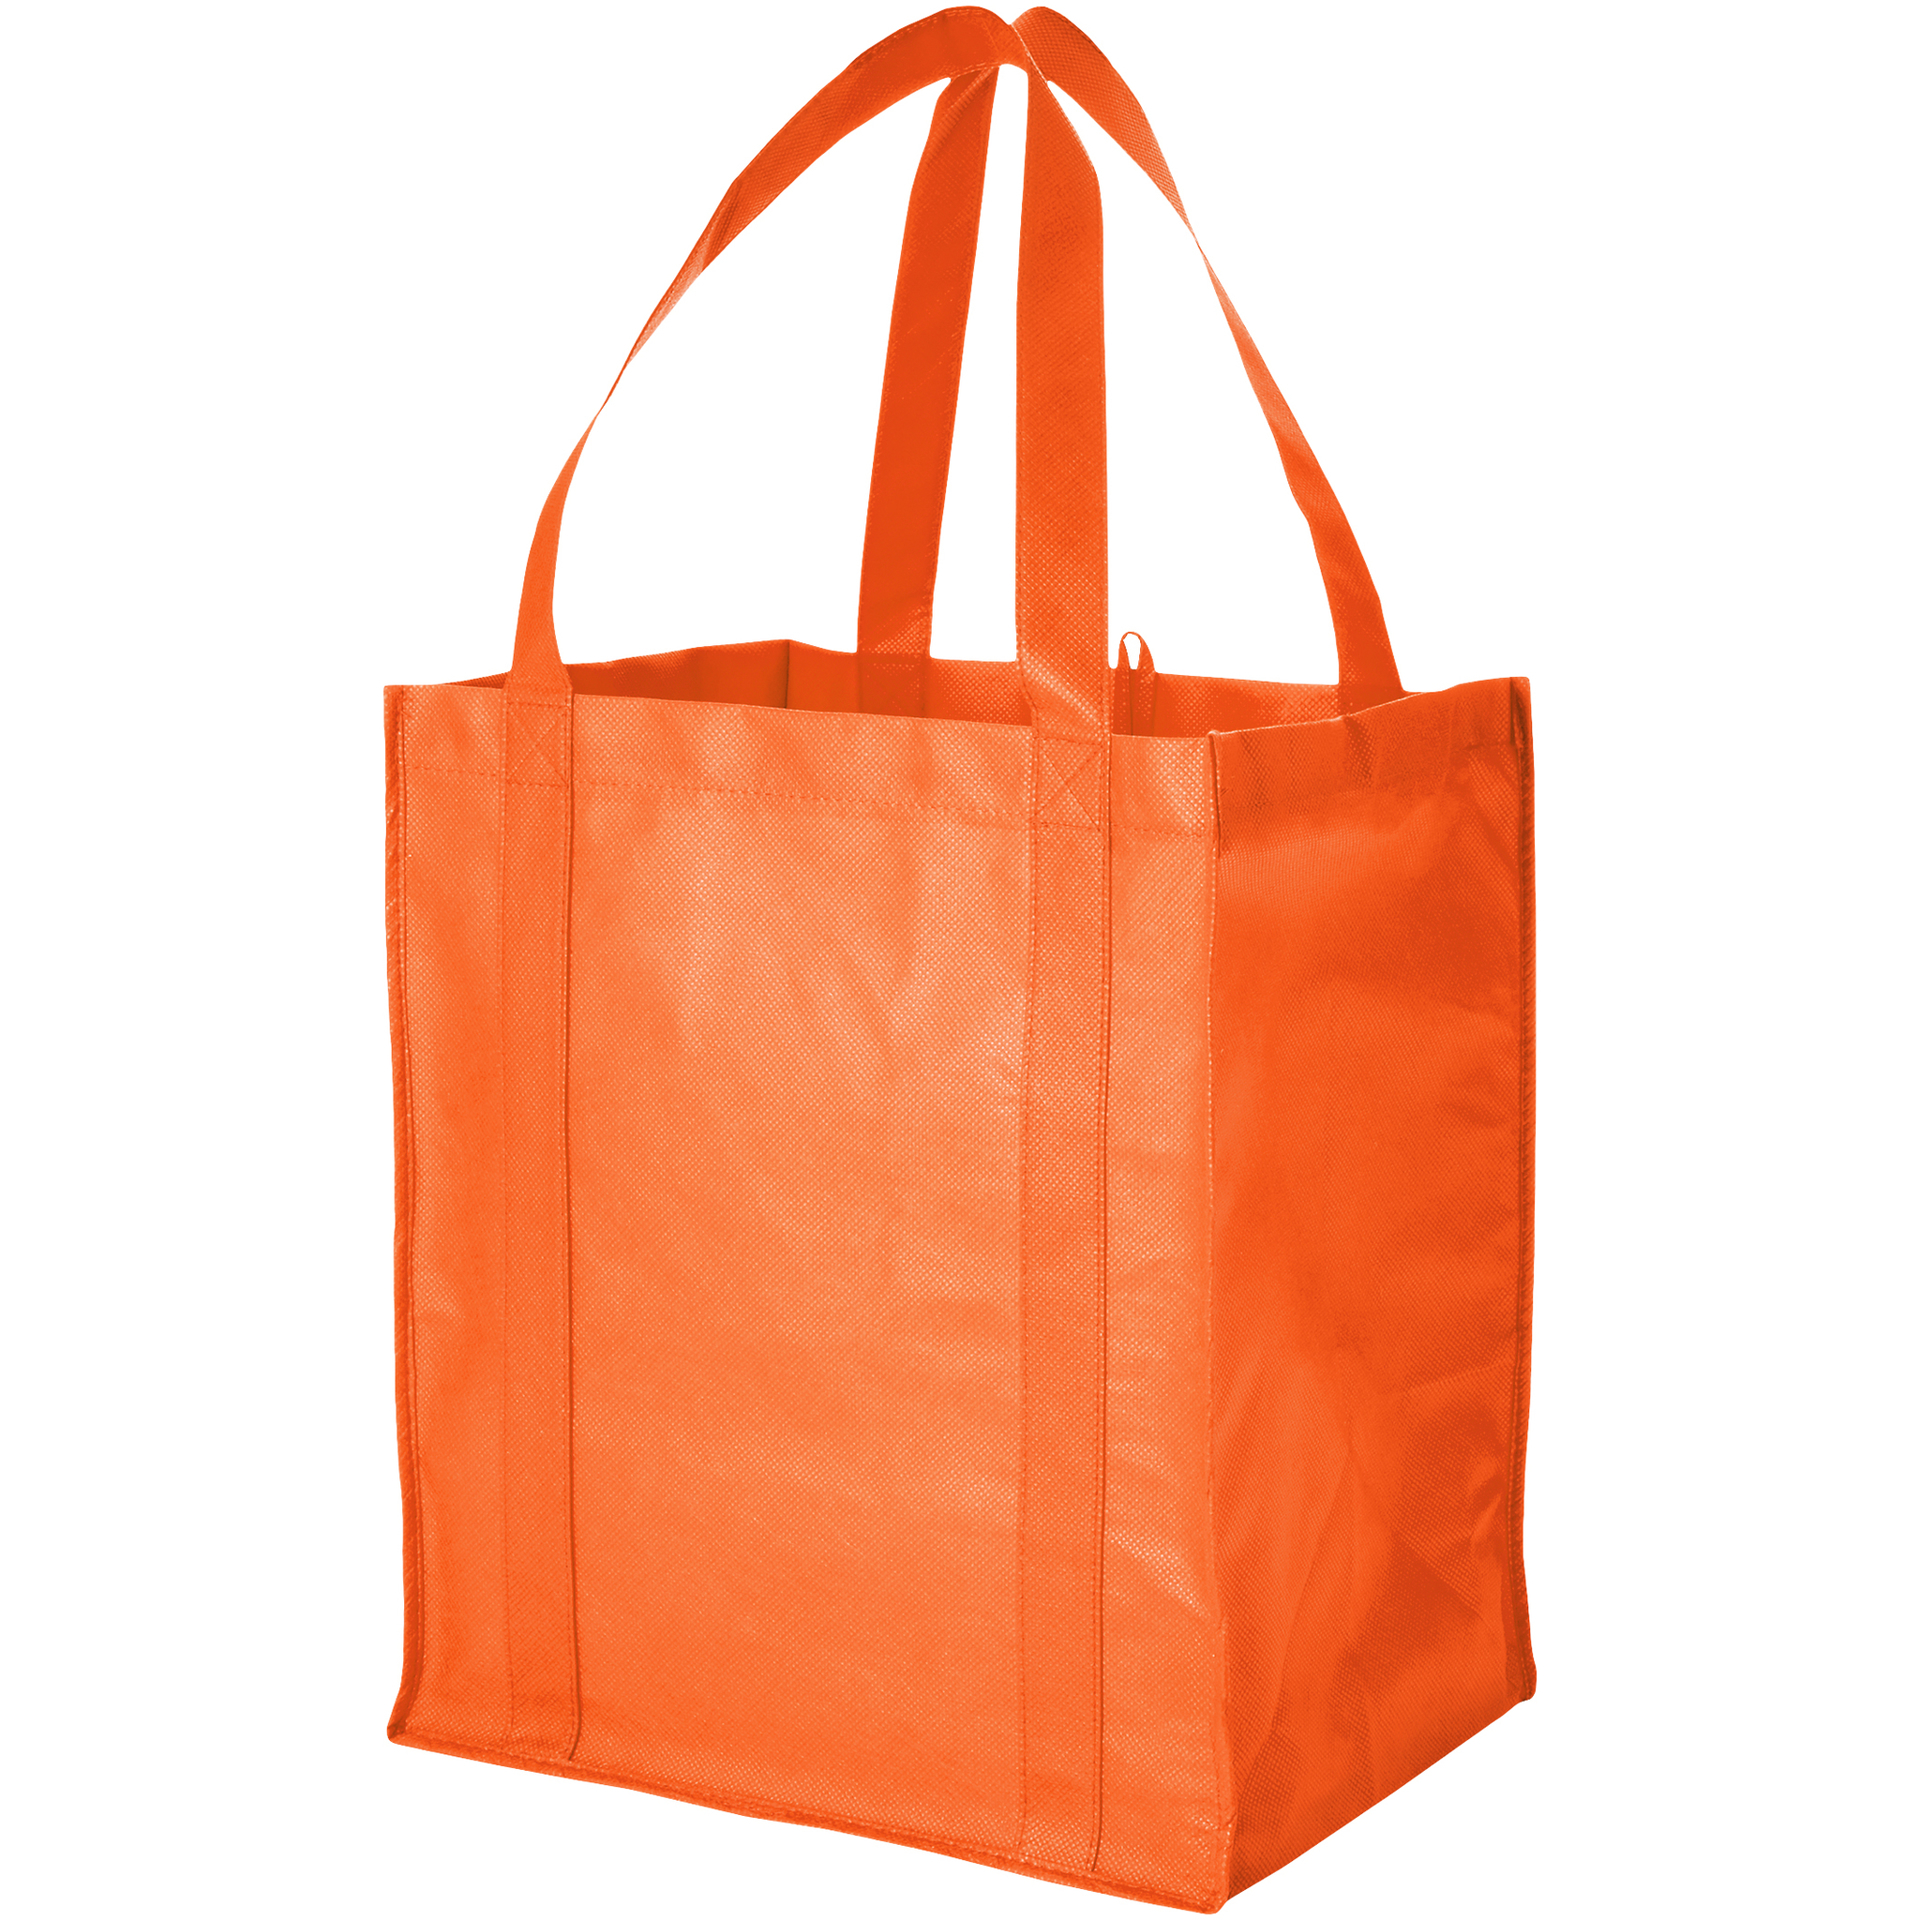 Reusable shopper bag in orange with matching carry handles